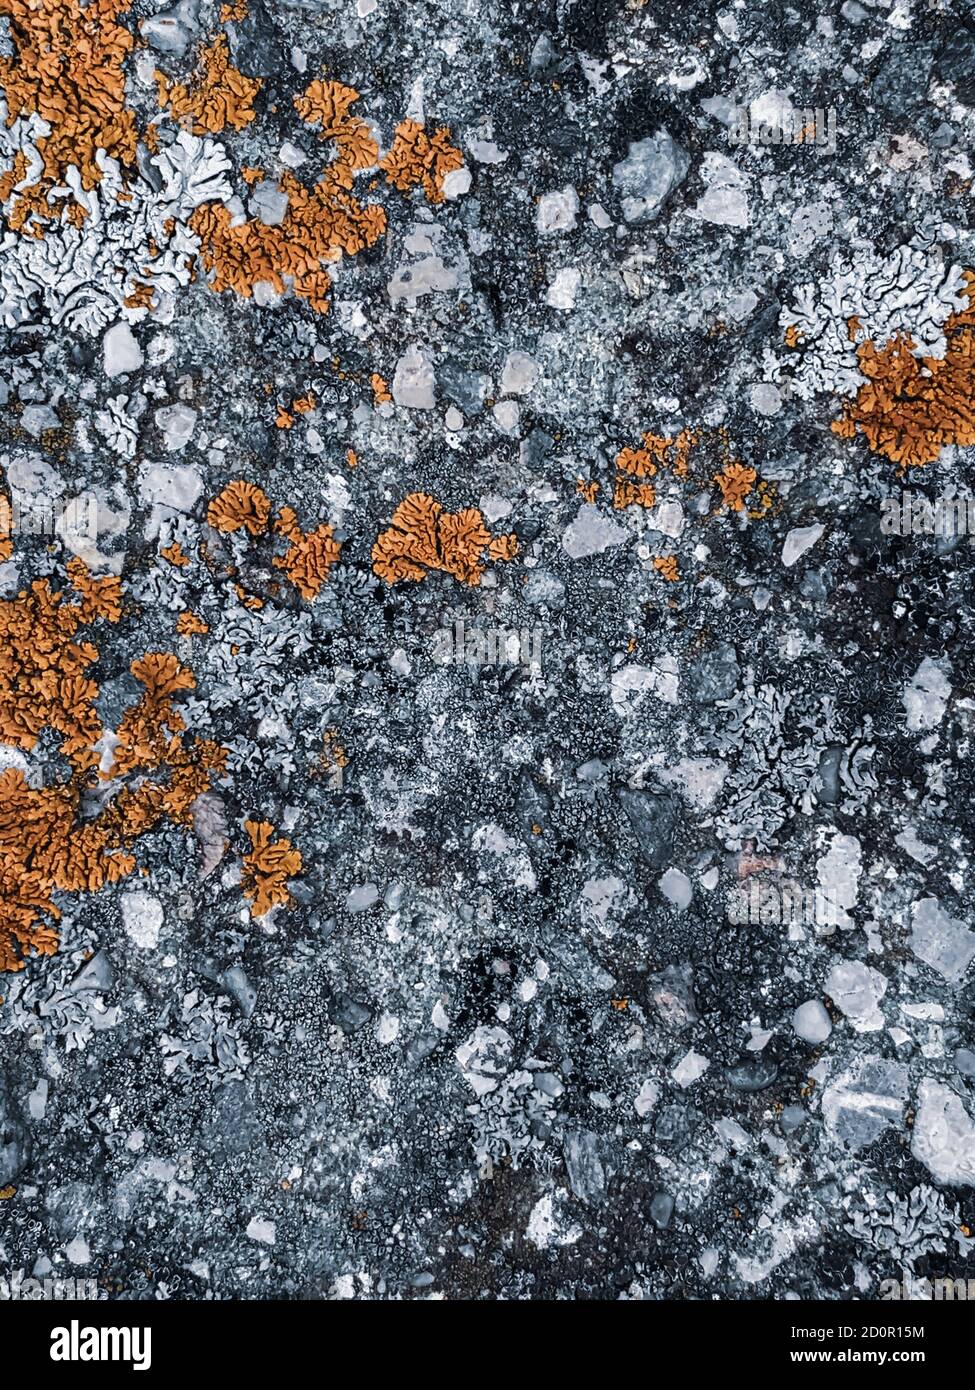 Top view shot of 'lecanora helicopis' rim lichens on a gray rocky surface Stock Photo